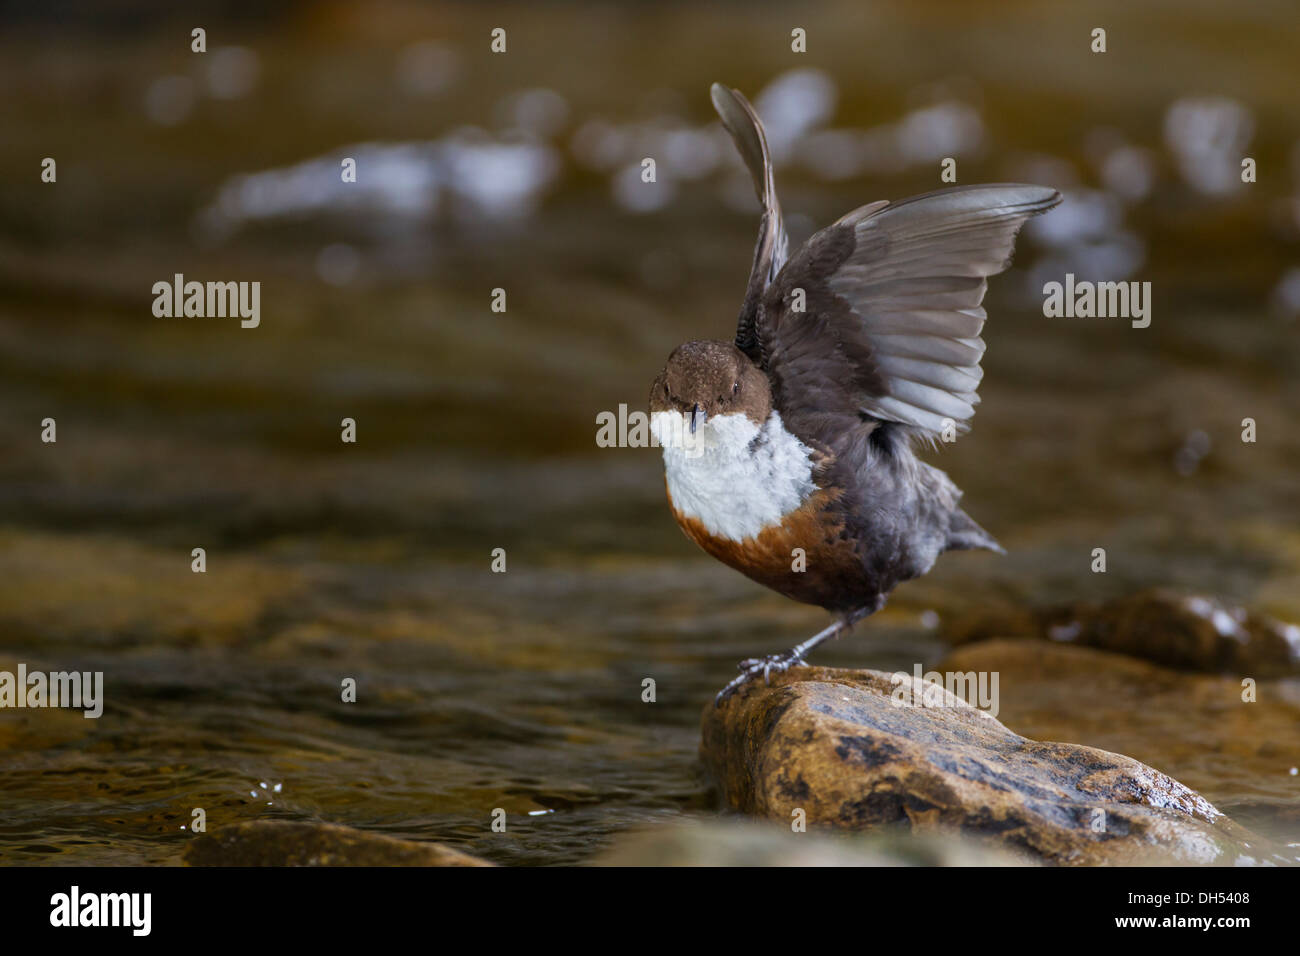 European, white throated, Dipper (cinclus cinclus) stretching wings on rock. Yorkshire Dales, North Yorkshire, England, UK Stock Photo